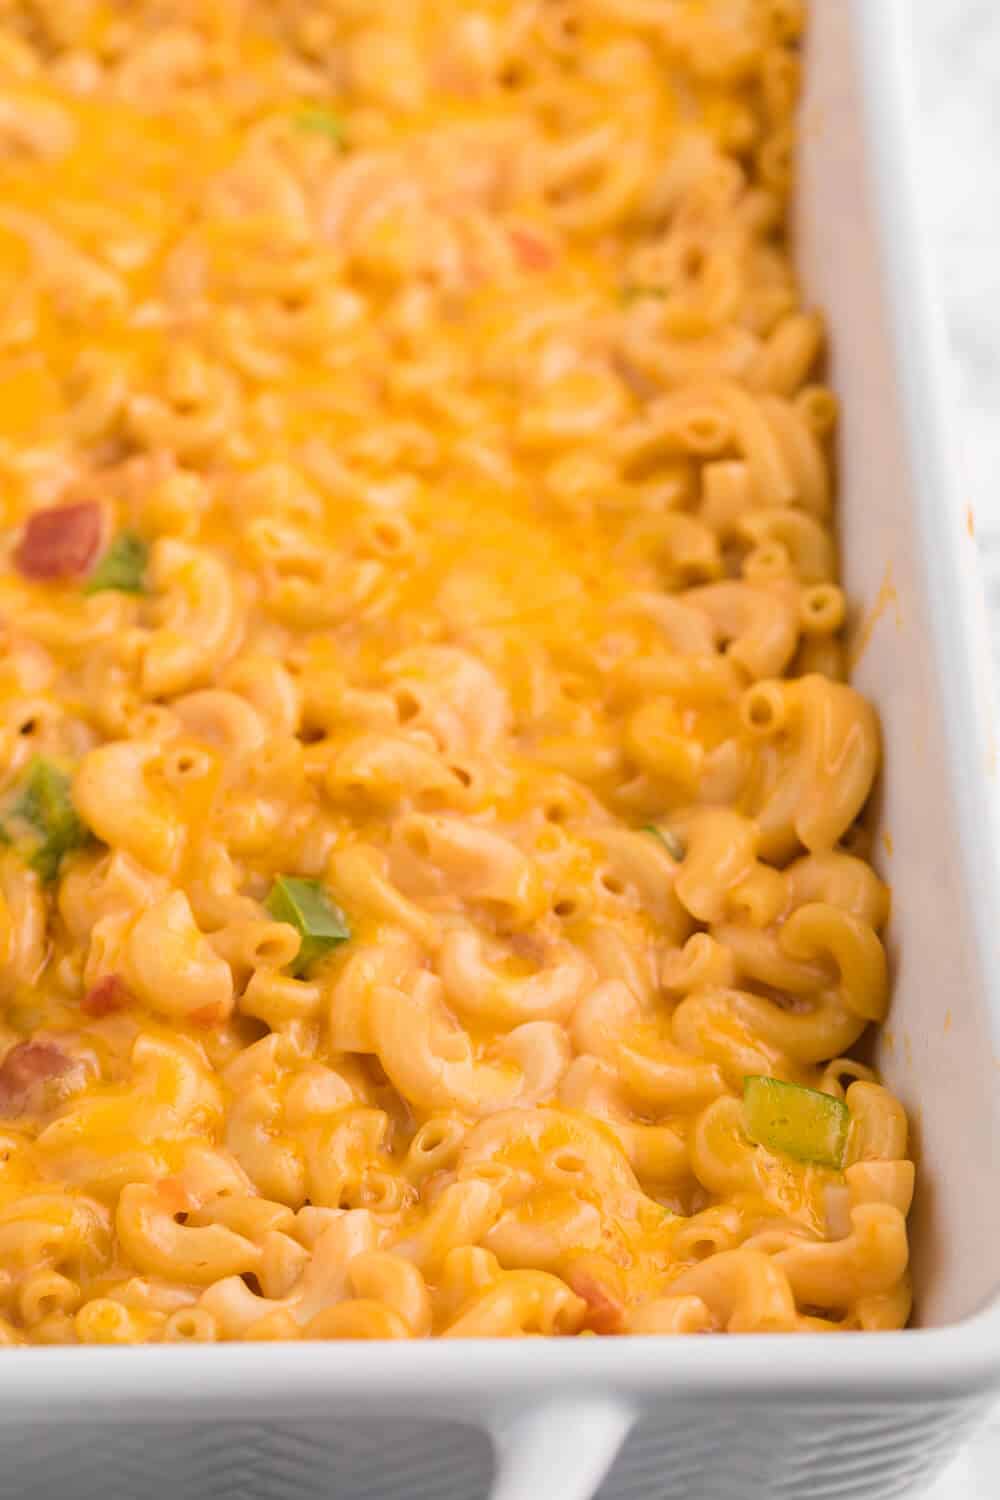 Salsa Macaroni & Cheese - Classic mac and cheese with a Tex Mex twist! Spice levels can be controlled by using medium or hot salsa, which is a great compliment to the cheesy, creamy sauce.